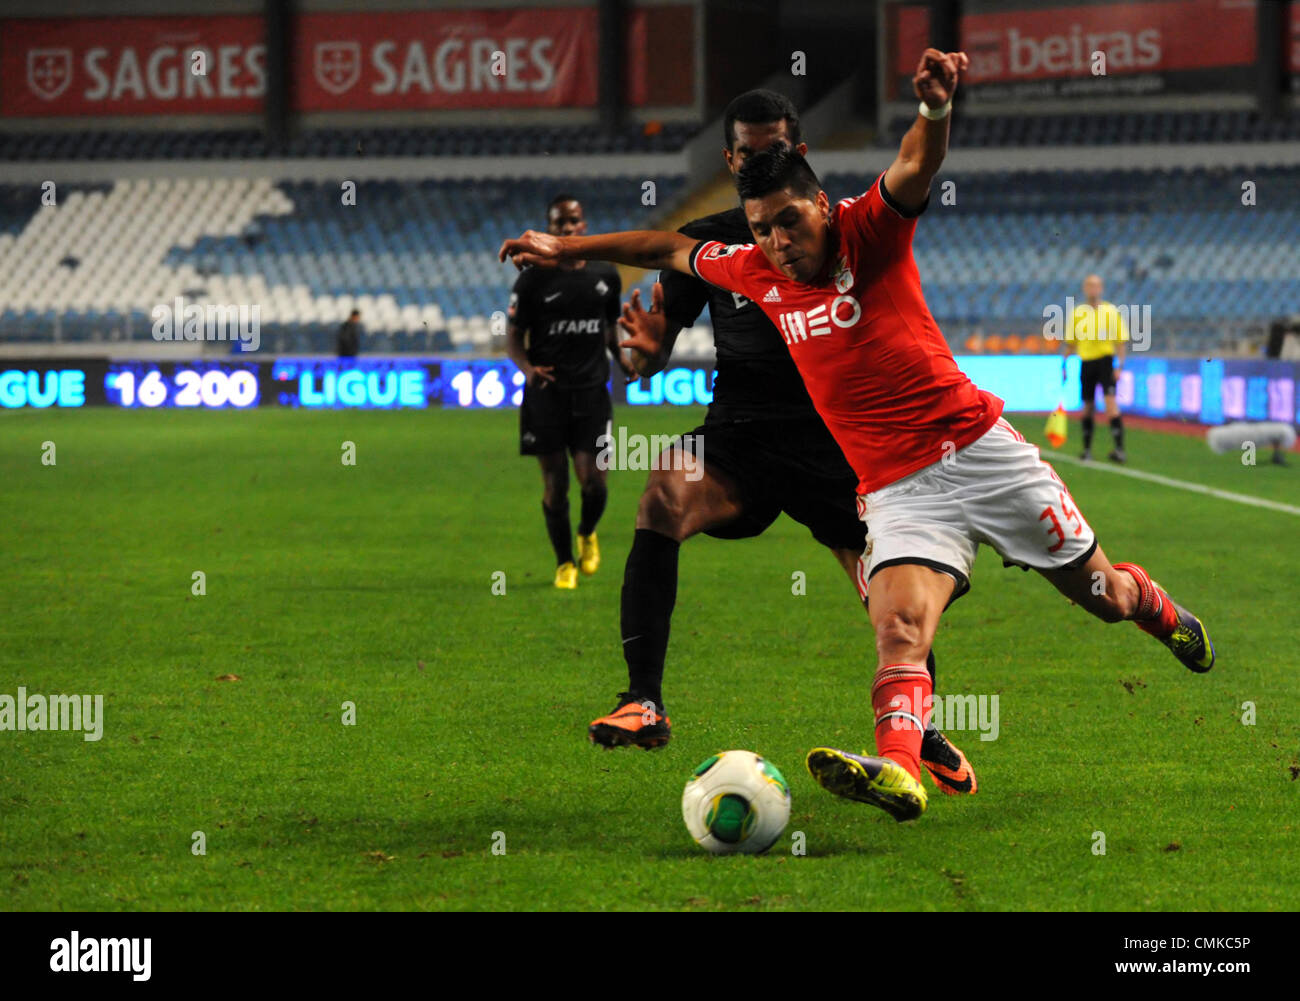 Benfica's argentine player Enzo Perez vies for the ball with Academica defenders during the portuguese Liga Sagres football match between Academica and Benfica Stock Photo